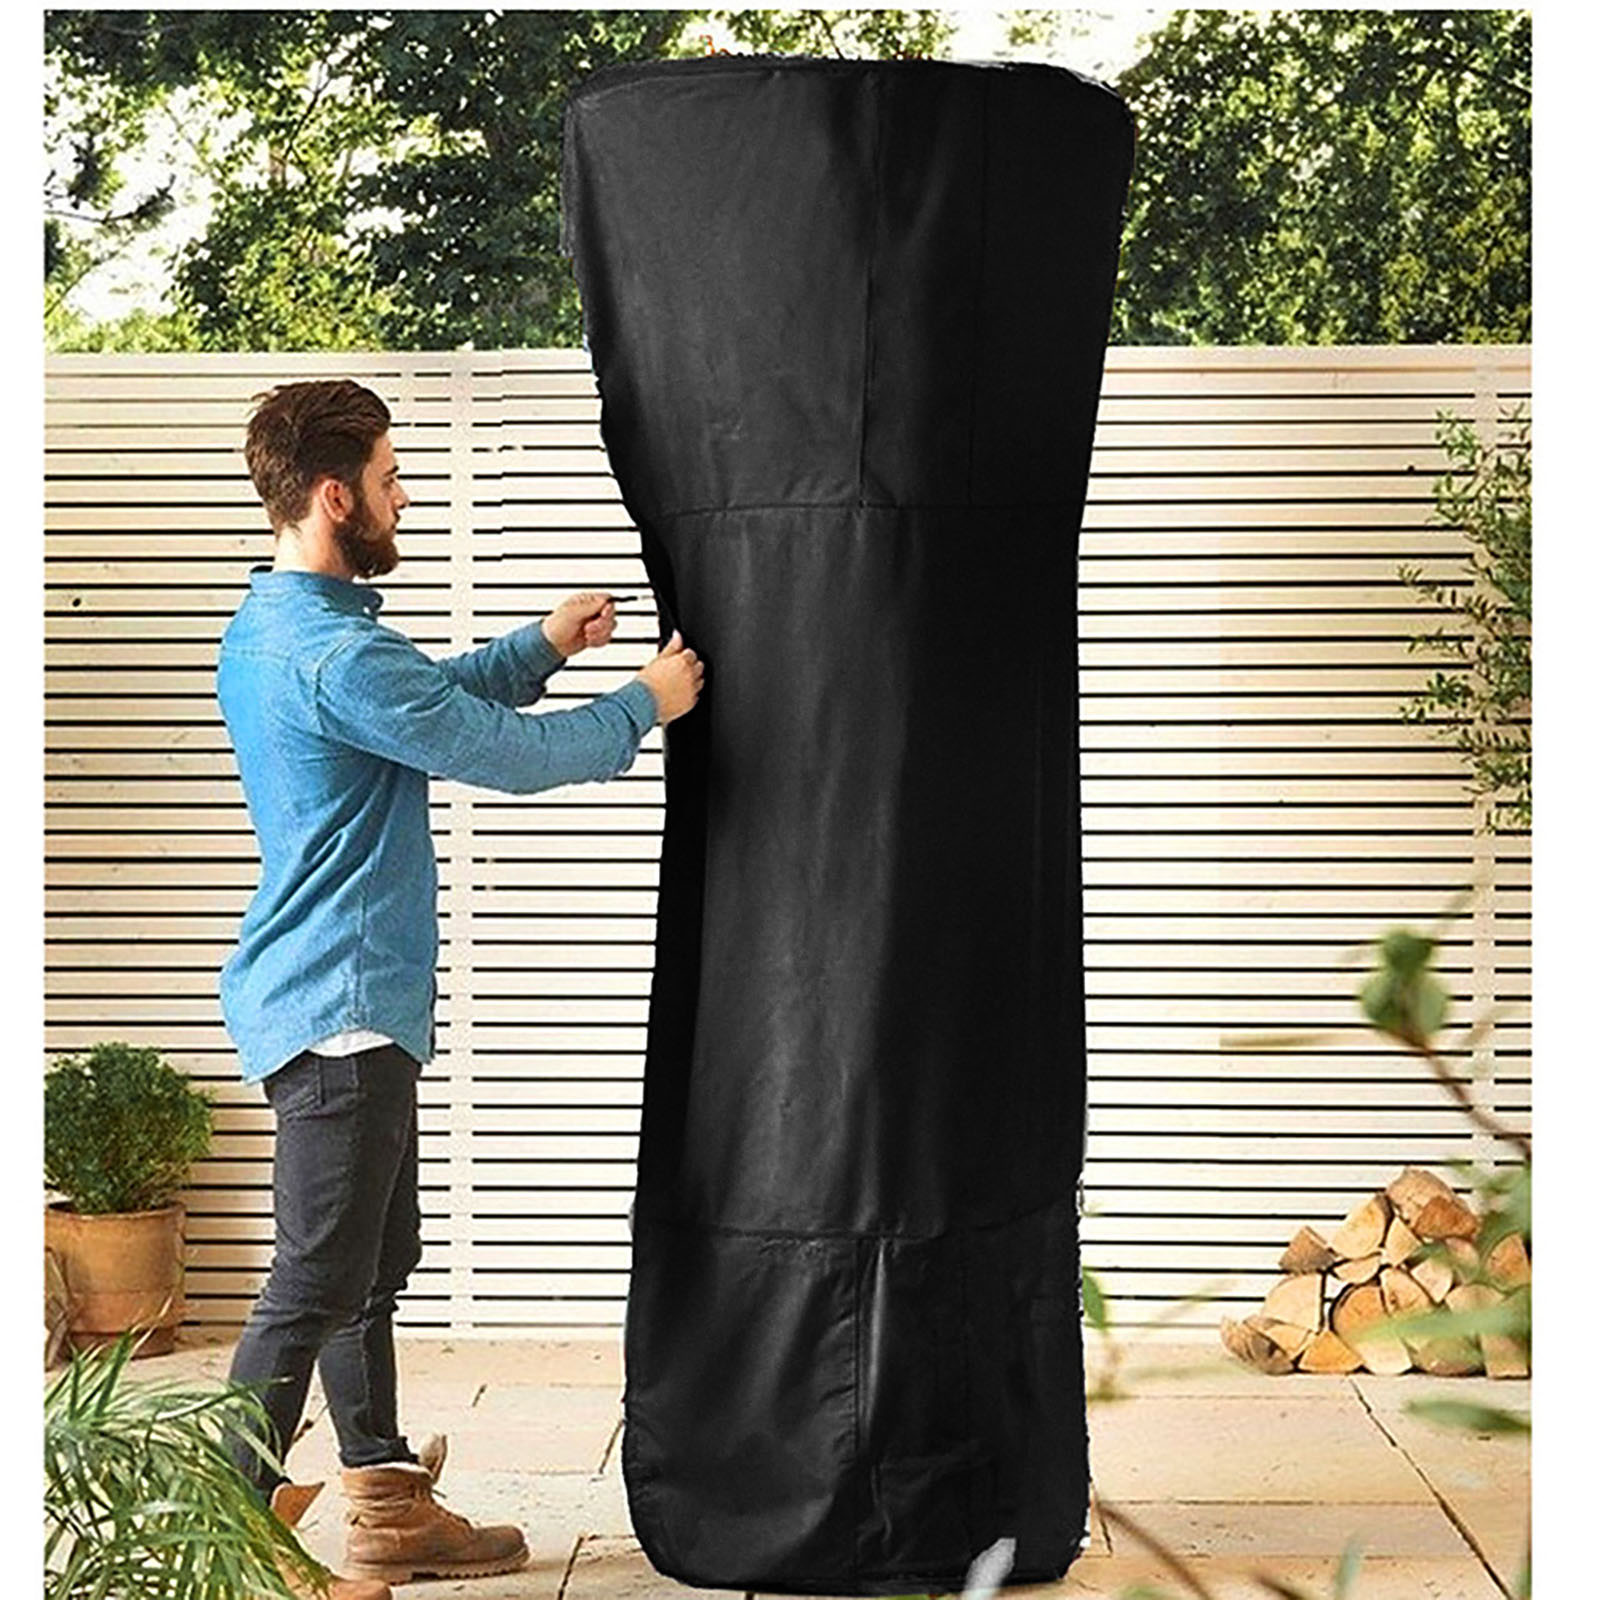 oxford black coated waterproof fabric Garden Heater Cover Patio Heater Duty Tabletop Cover Protect Heater from Damage d3